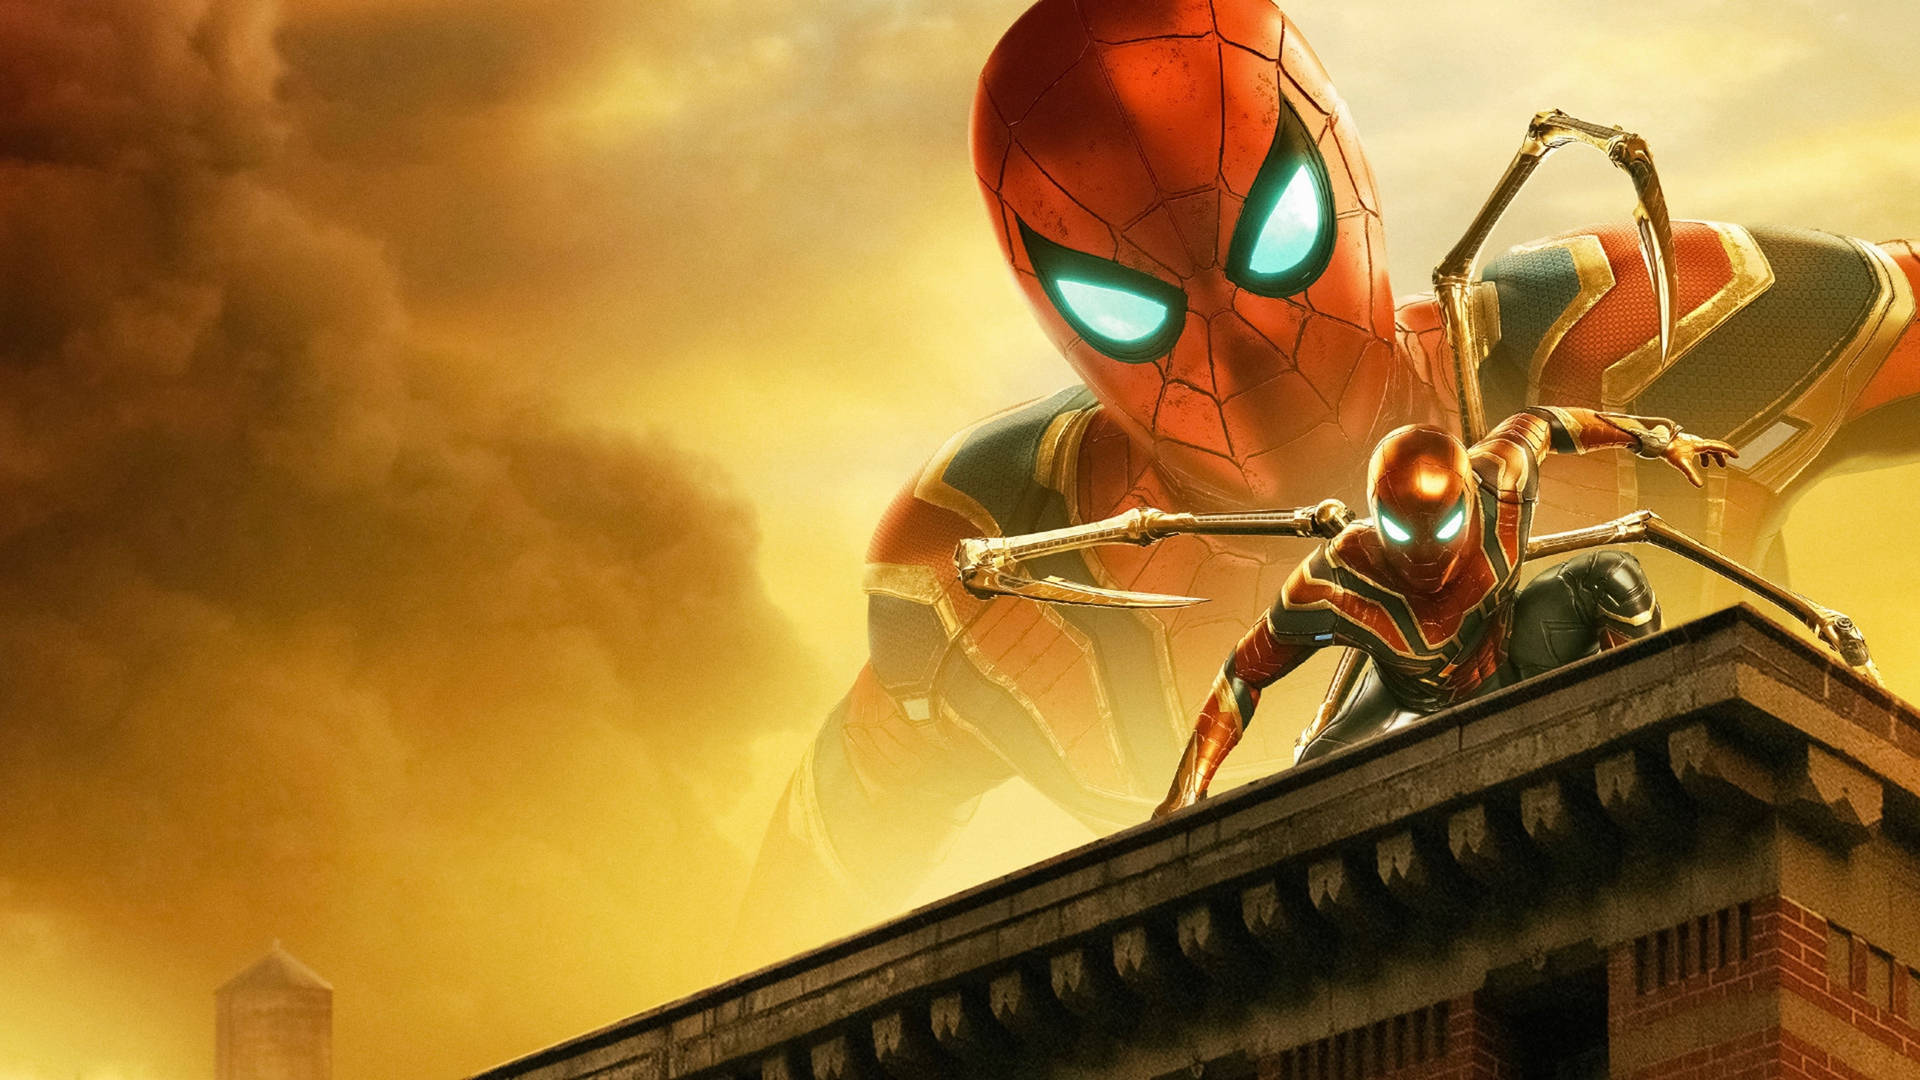 Gold Spider Man Far From Home 2019 Background